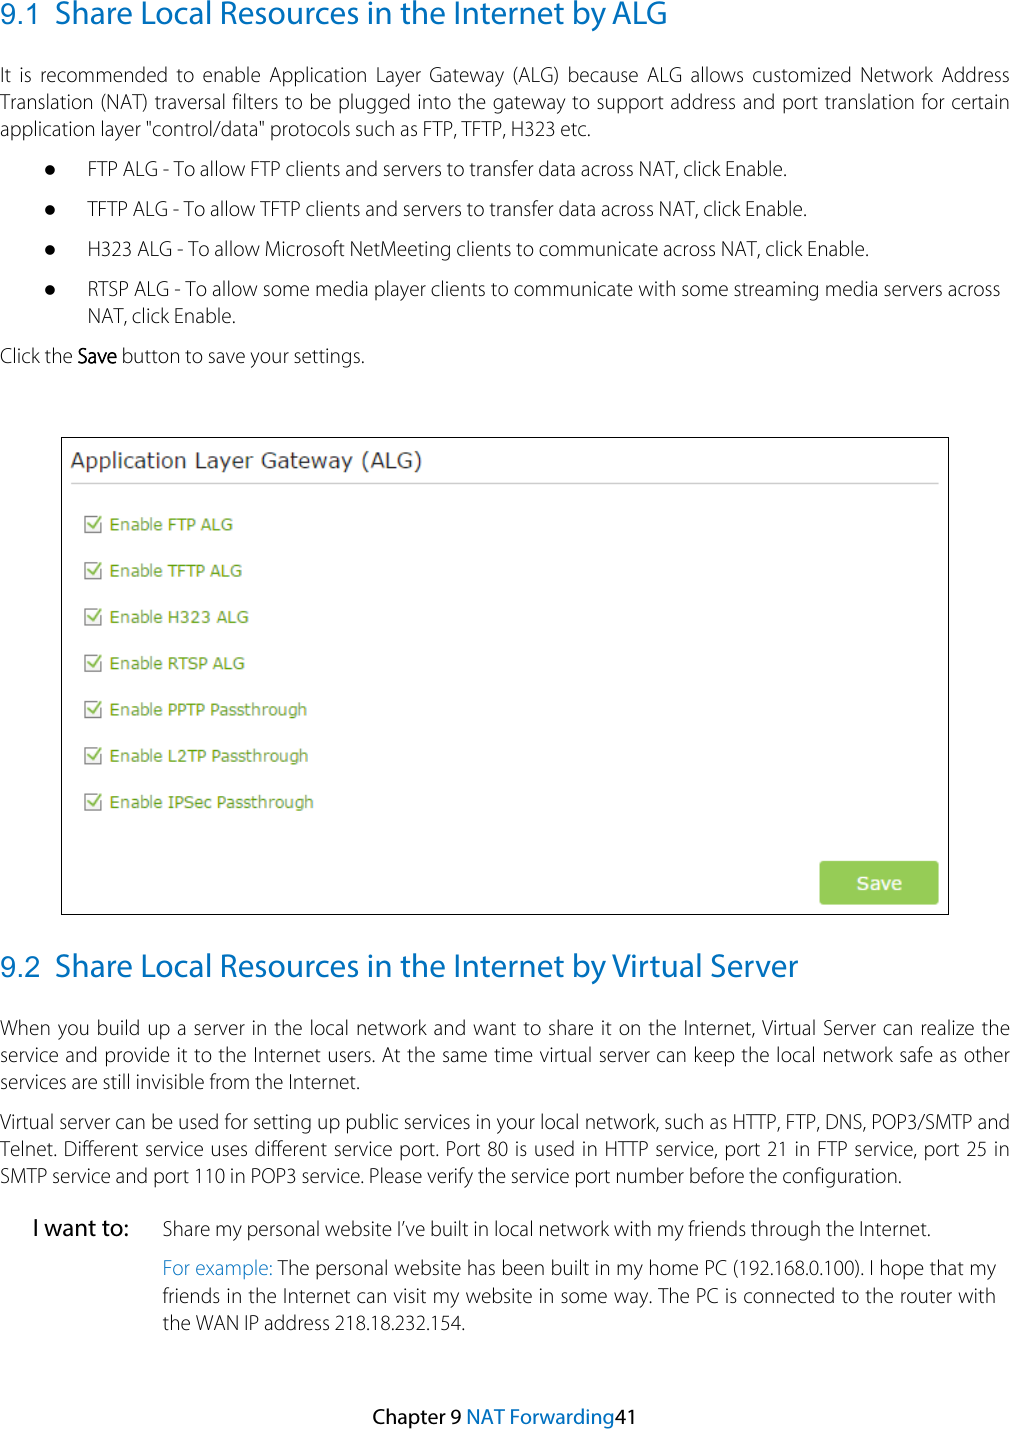 9.1 Share Local Resources in the Internet by ALG It is recommended to enable Application Layer Gateway (ALG) because ALG allows customized Network Address Translation (NAT) traversal filters to be plugged into the gateway to support address and port translation for certain application layer &quot;control/data&quot; protocols such as FTP, TFTP, H323 etc. FTP ALG - To allow FTP clients and servers to transfer data across NAT, click Enable.TFTP ALG - To allow TFTP clients and servers to transfer data across NAT, click Enable.H323 ALG - To allow Microsoft NetMeeting clients to communicate across NAT, click Enable.RTSP ALG - To allow some media player clients to communicate with some streaming media servers acrossNAT, click Enable.Click the Save button to save your settings. 9.2 Share Local Resources in the Internet by Virtual Server When you build up a server in the local network and want to share it on the Internet, Virtual Server can realize the service and provide it to the Internet users. At the same time virtual server can keep the local network safe as other services are still invisible from the Internet. Virtual server can be used for setting up public services in your local network, such as HTTP, FTP, DNS, POP3/SMTP and Telnet. Different service uses different service port. Port 80 is used in HTTP service, port 21 in FTP service, port 25 in SMTP service and port 110 in POP3 service. Please verify the service port number before the configuration. I want to: Share my personal website I’ve built in local network with my friends through the Internet. For example: The personal website has been built in my home PC (192.168.0.100). I hope that my friends in the Internet can visit my website in some way. The PC is connected to the router with the WAN IP address 218.18.232.154.   Chapter 9 NAT Forwarding41 